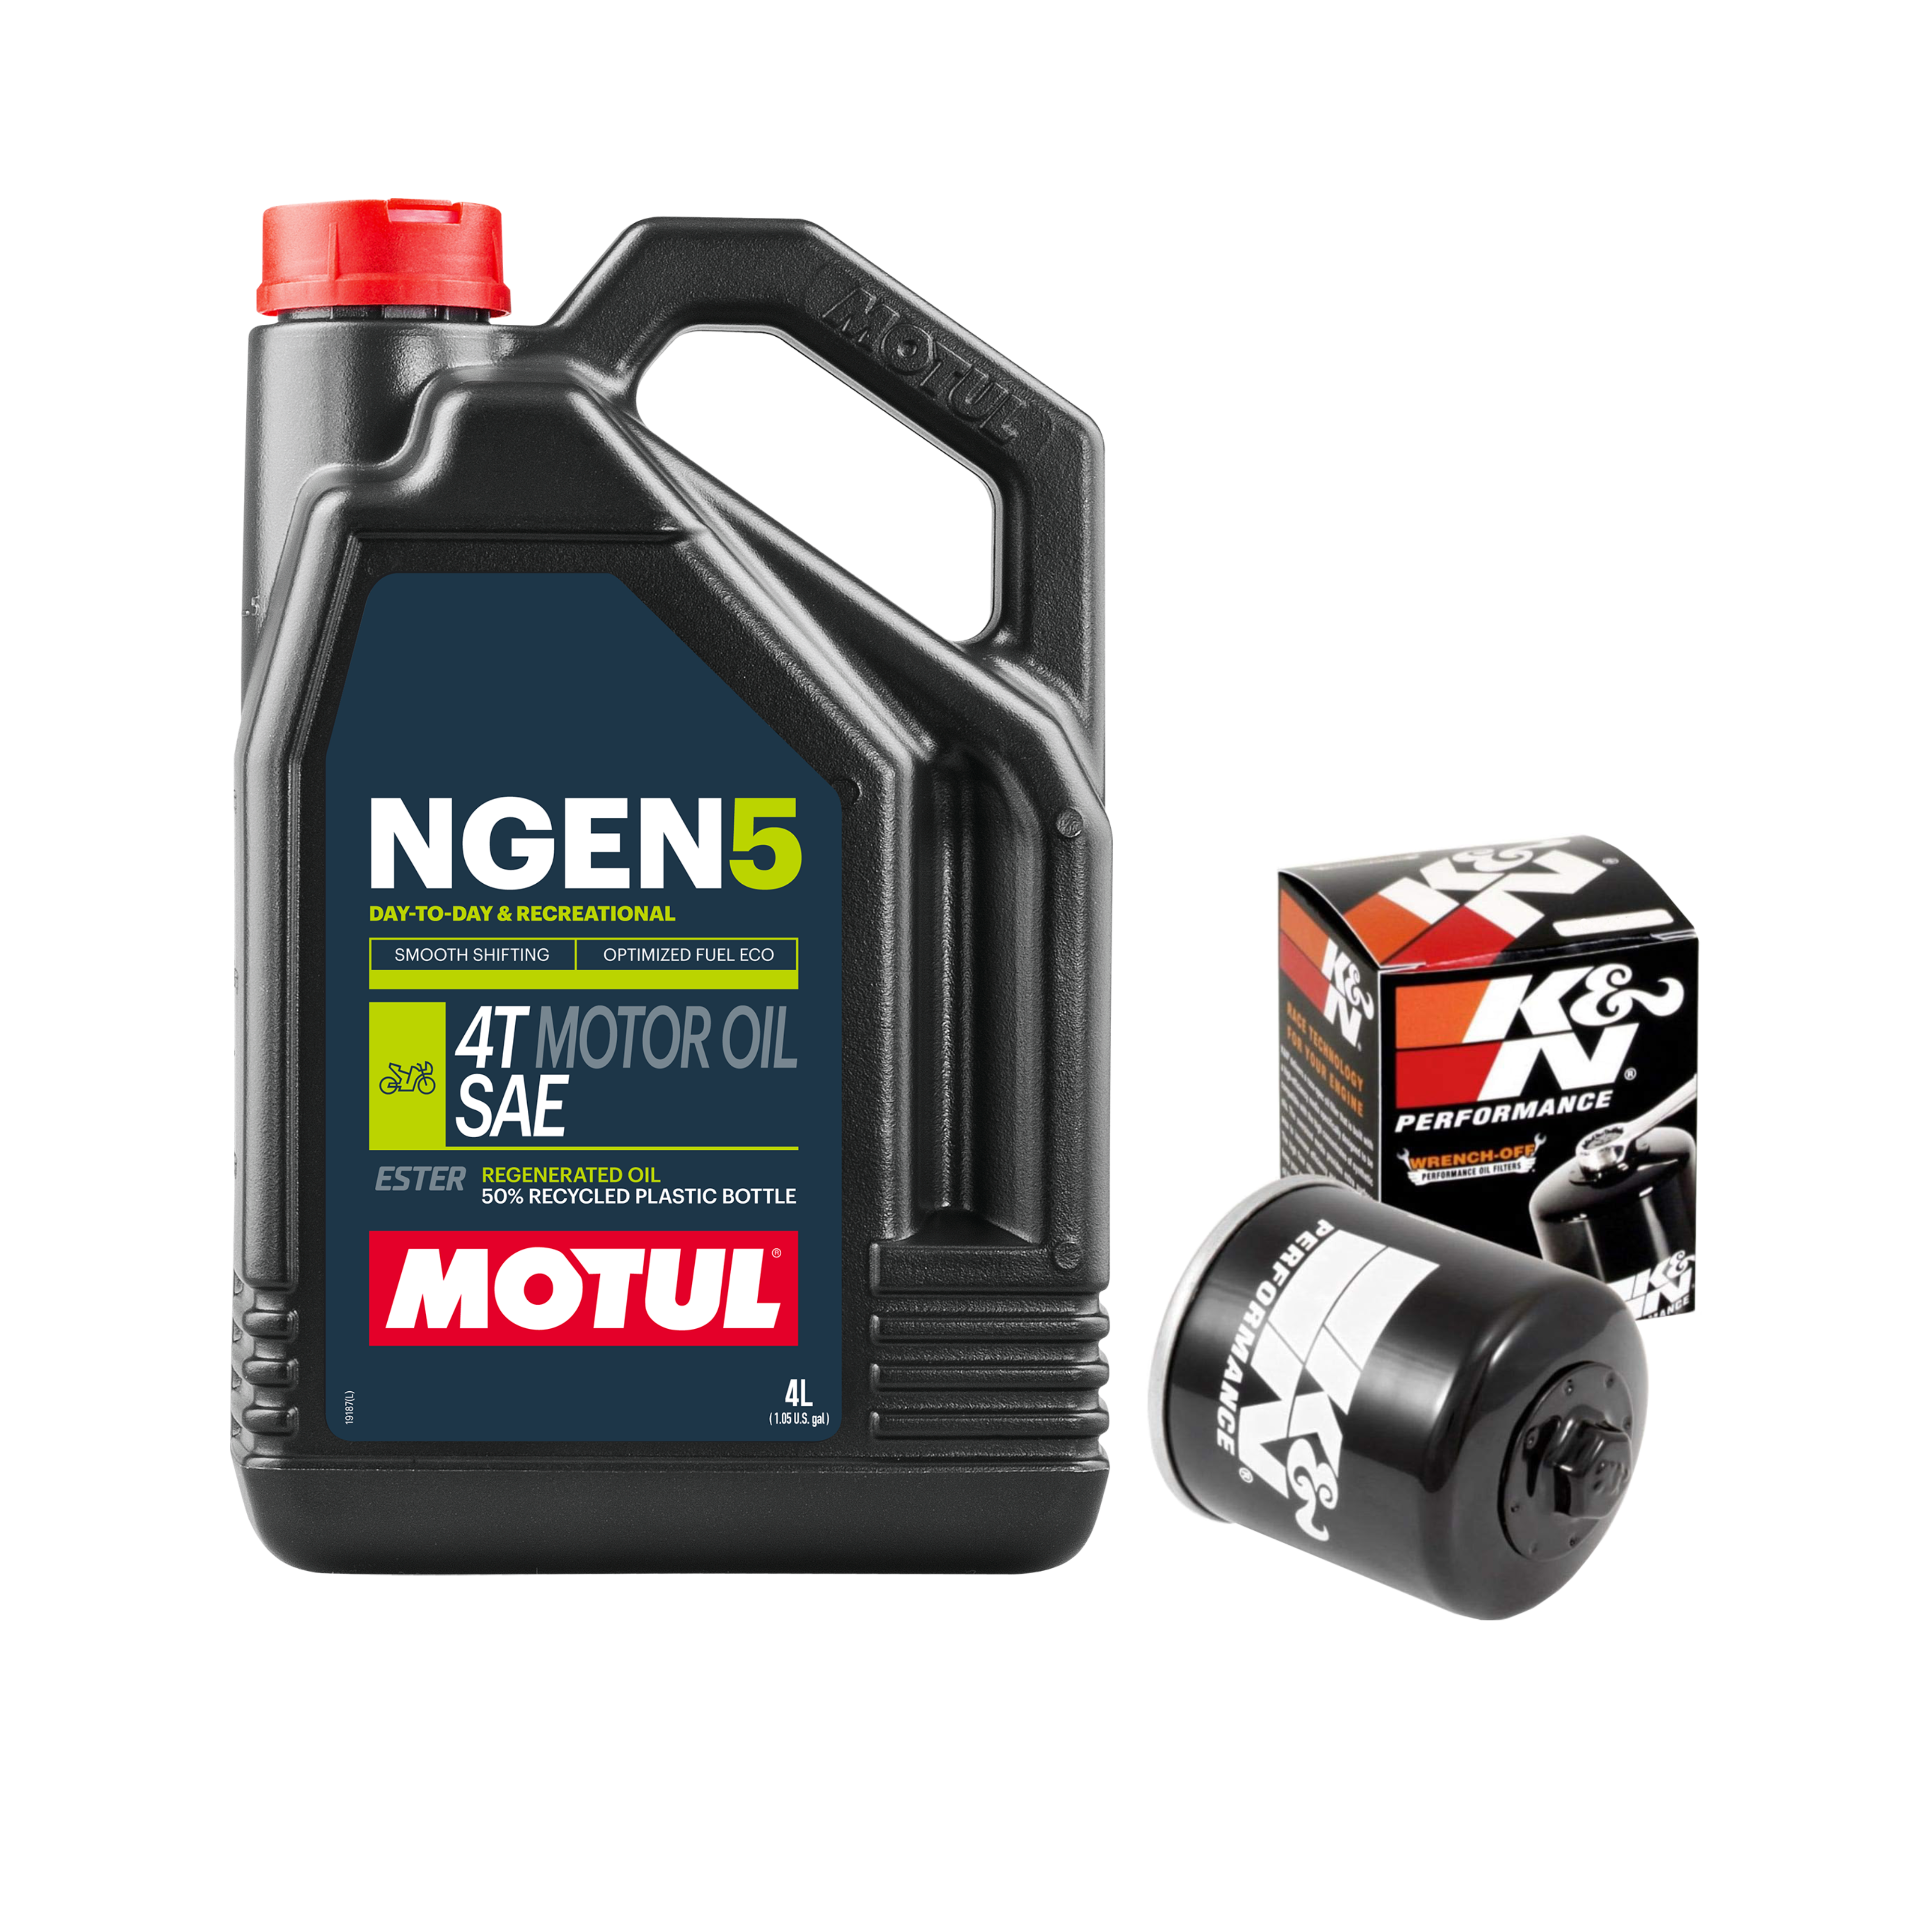 SUSTAINABILITY WITHOUT COMPROMISING PERFORMANCE WITH THE NEW MOTUL NGEN